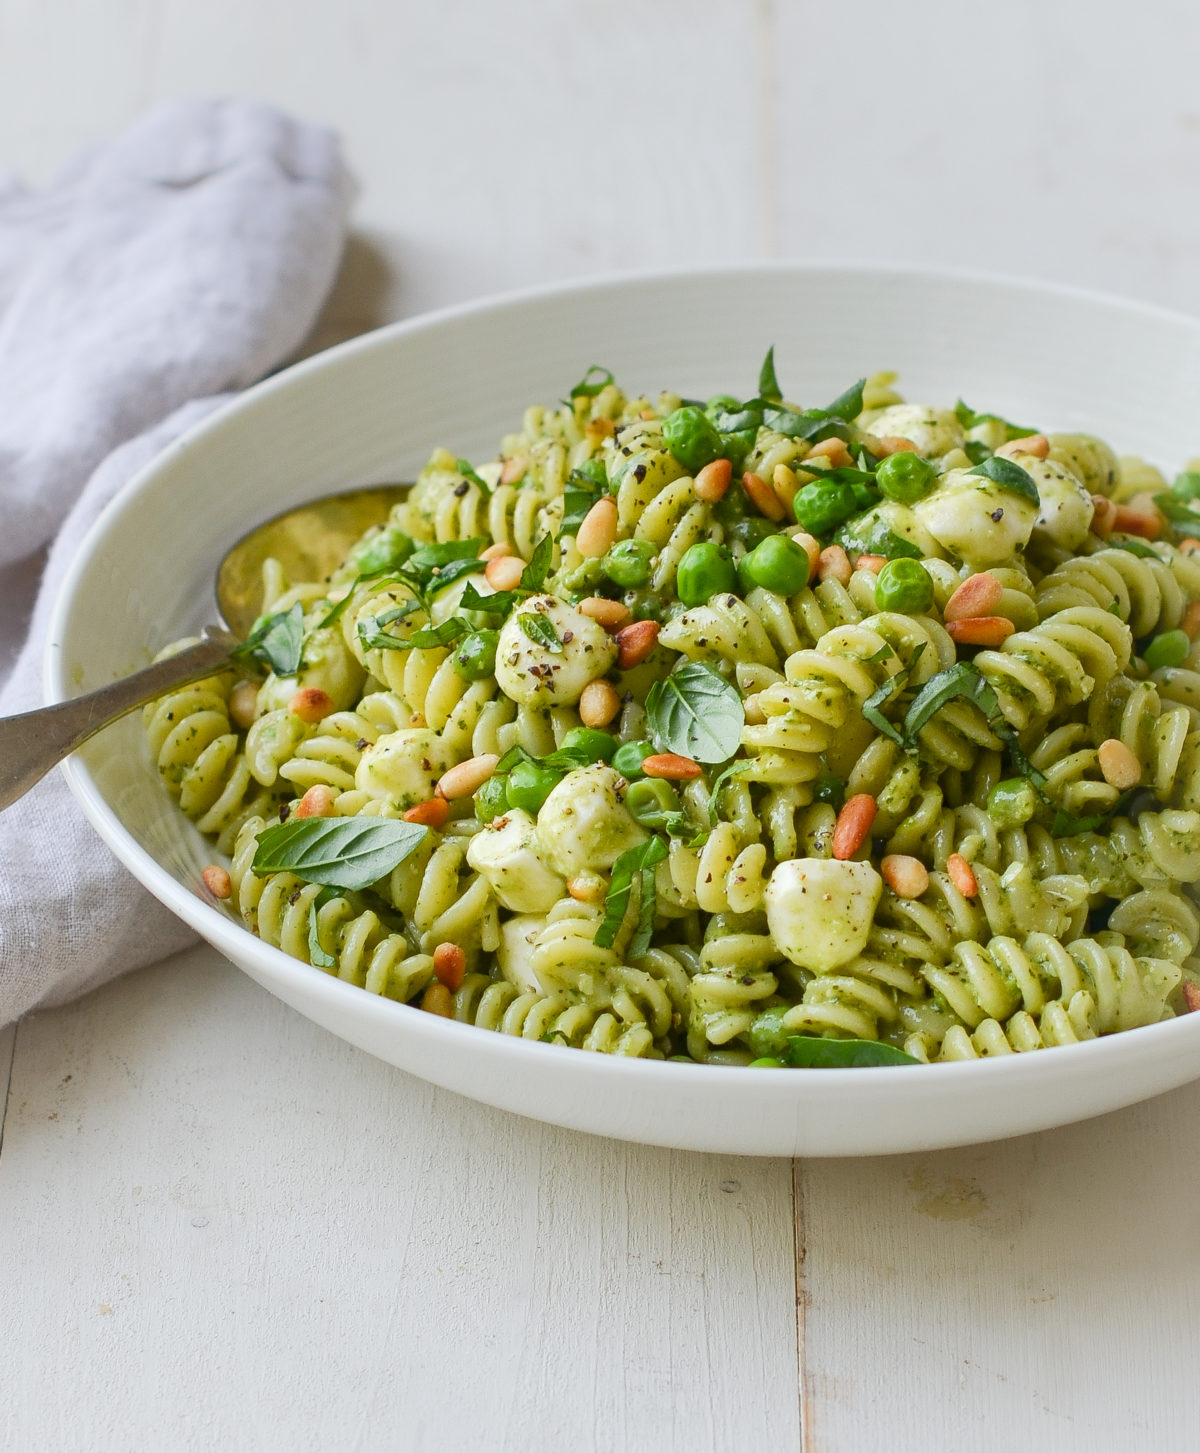 Pasta Salad with Pesto - Once Upon a Chef